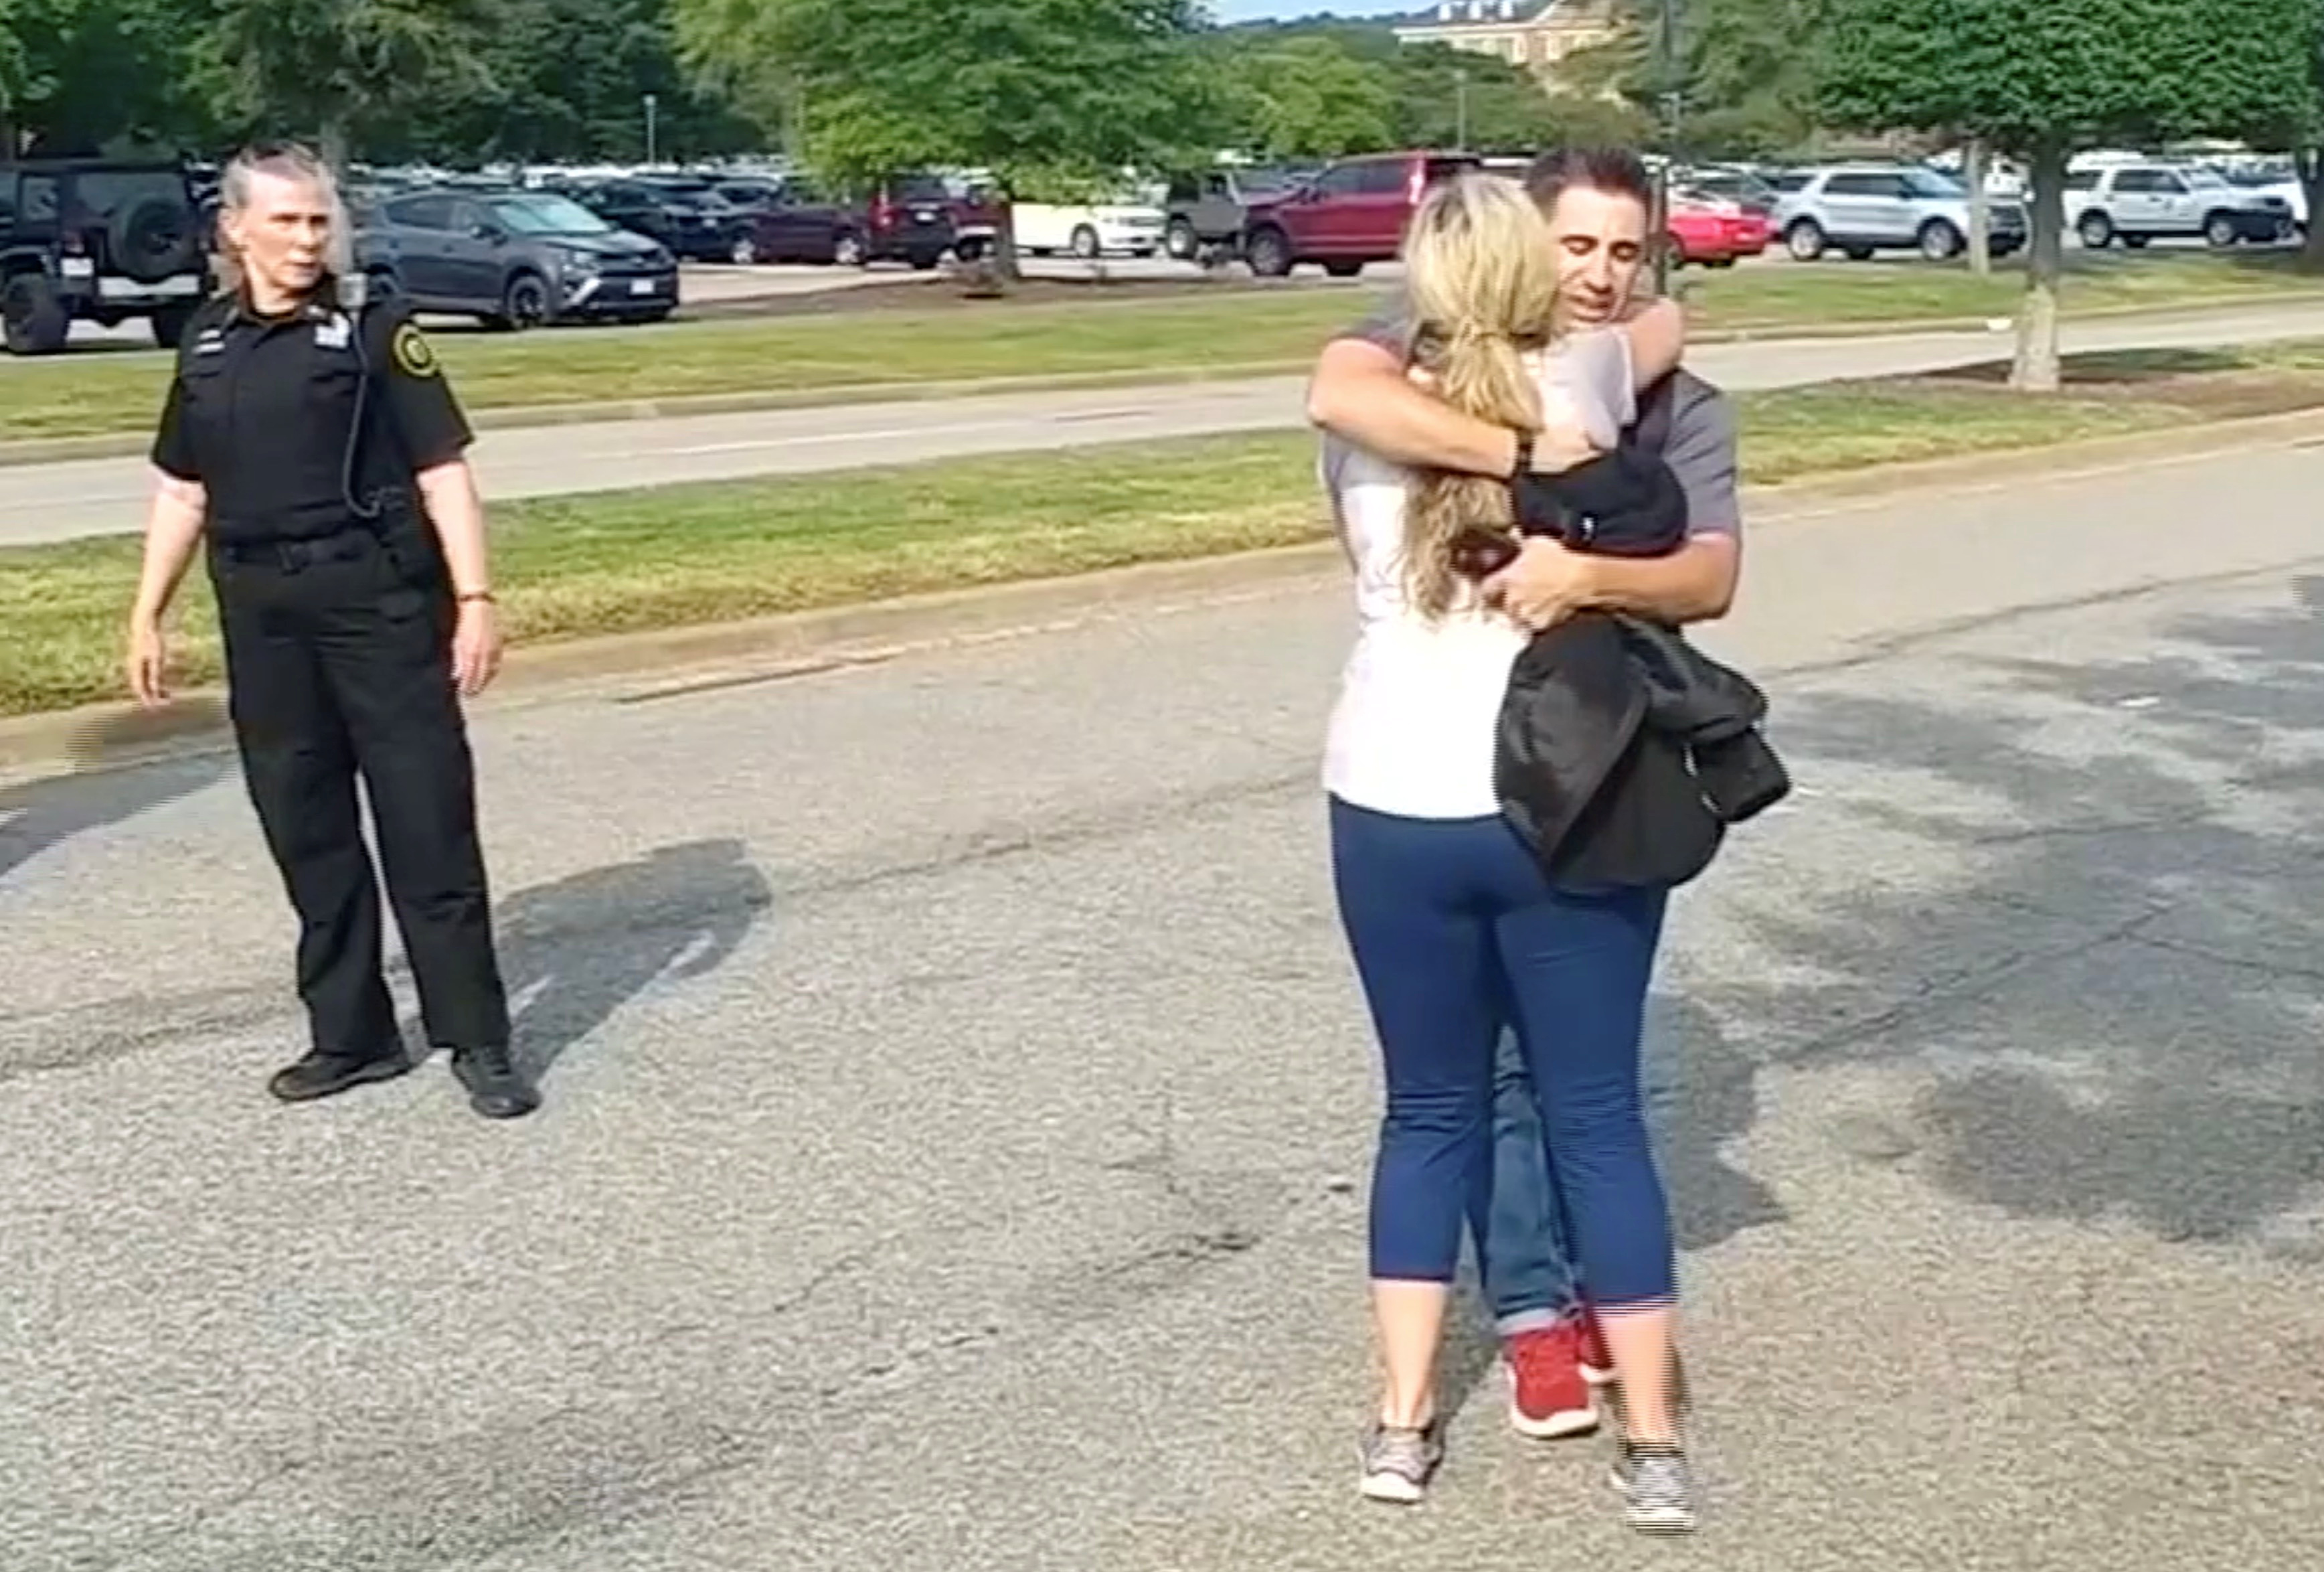 People embrace after being evacuated from a building by police in this still image taken from video following a shooting incident at the municipal center in Virginia Beach, Virginia, U.S. May 31, 2019. WAVY-TV/NBC/via REUTERS